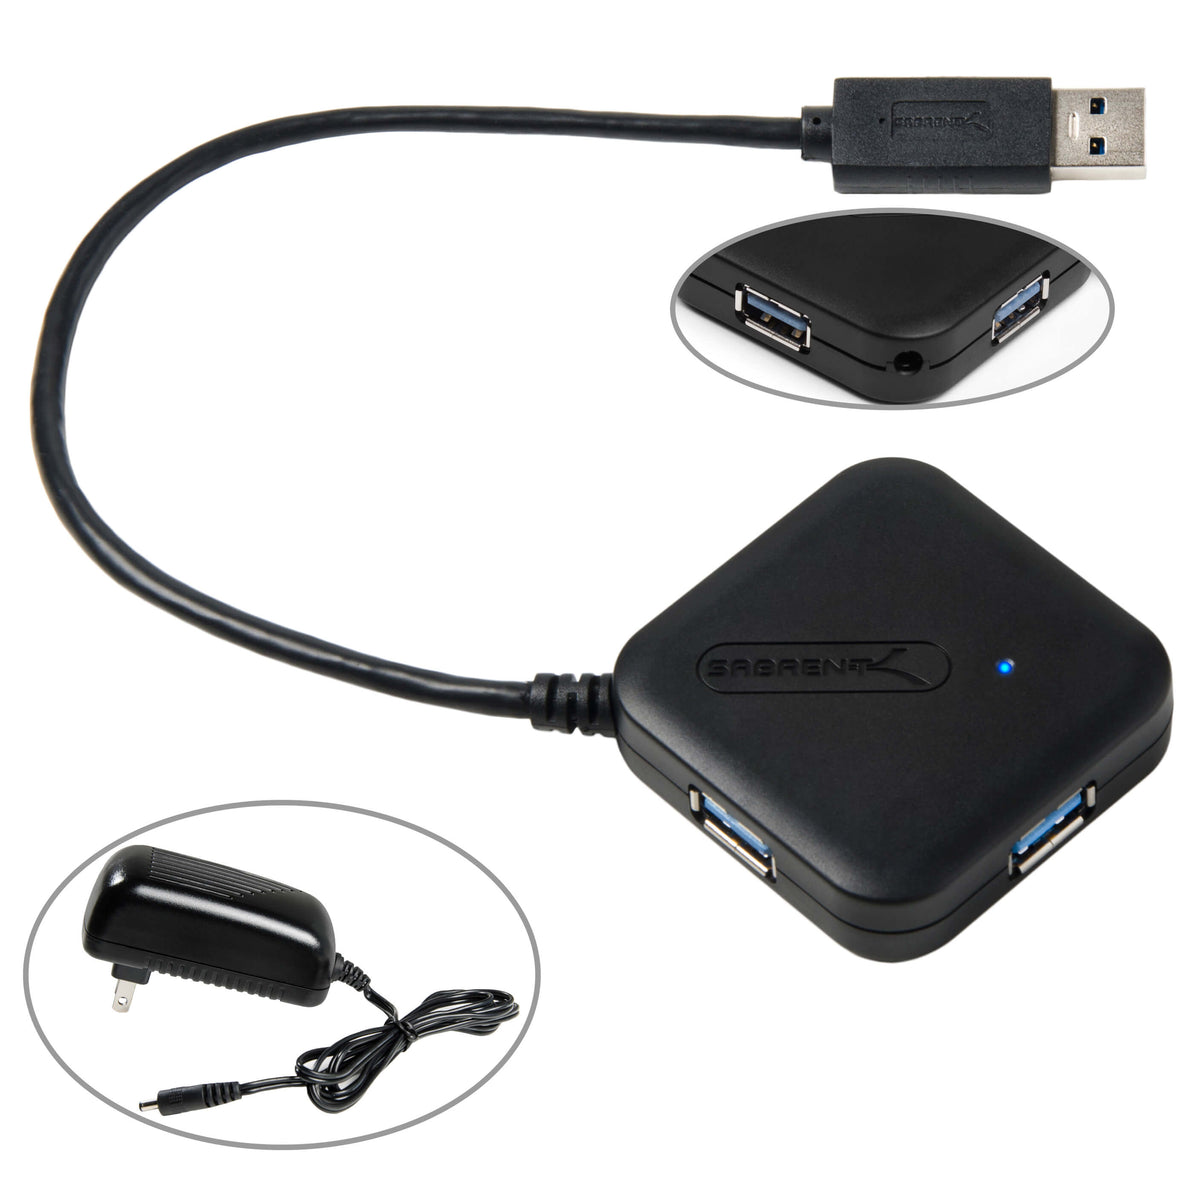 4 Port Portable USB 3.0 Hub With Powerful 5V/4A Power Adapter